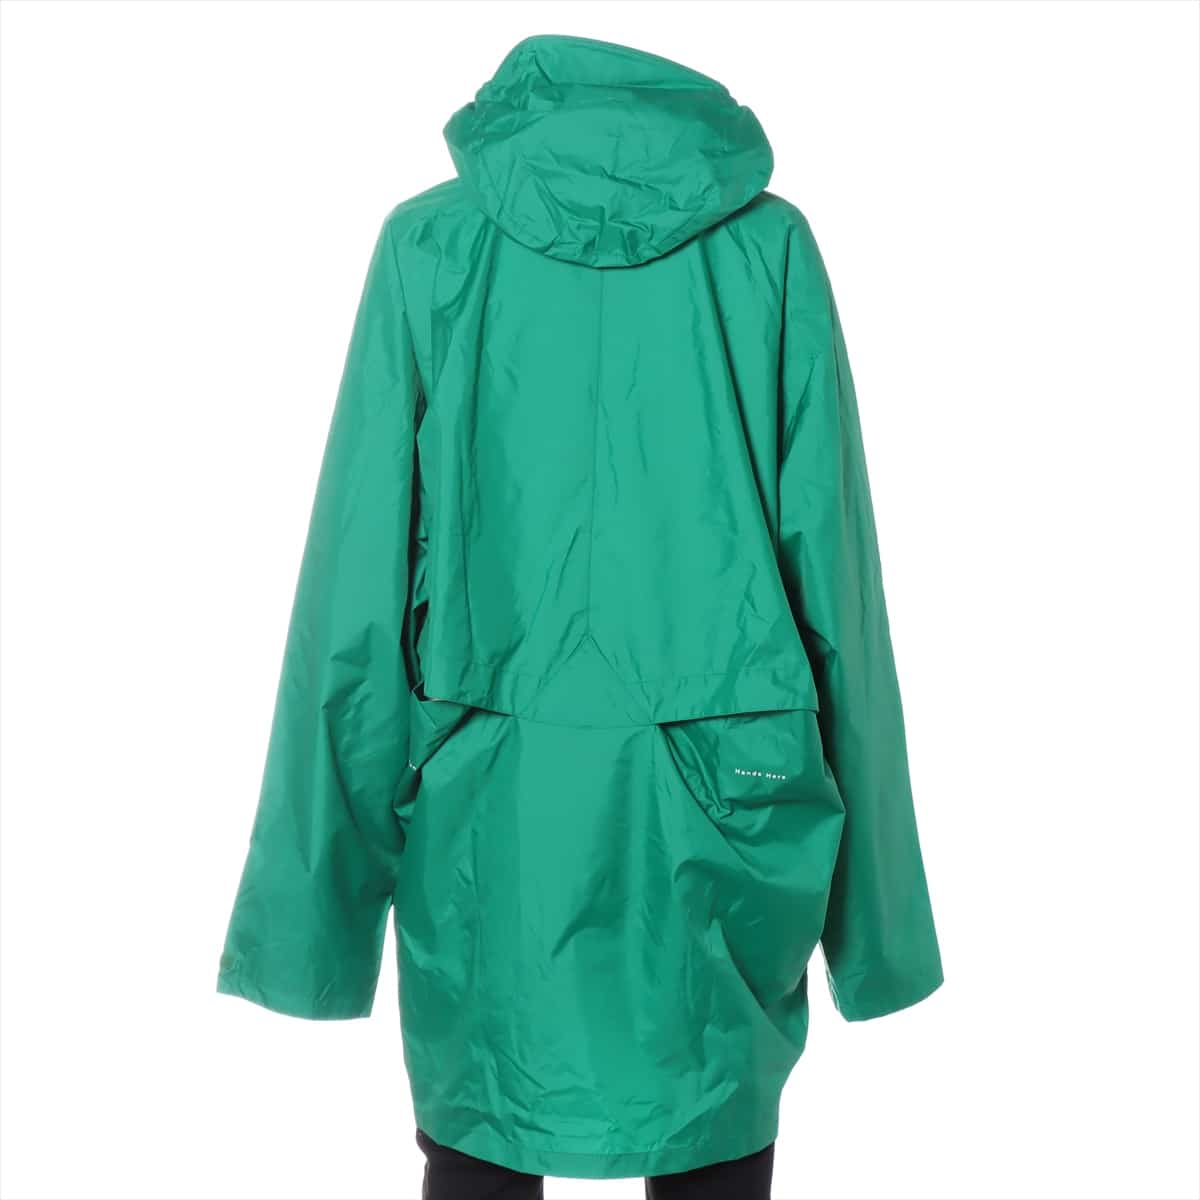 Napa by Martin Rose Polyester Parker 4 Men's Green  anorak hoodie